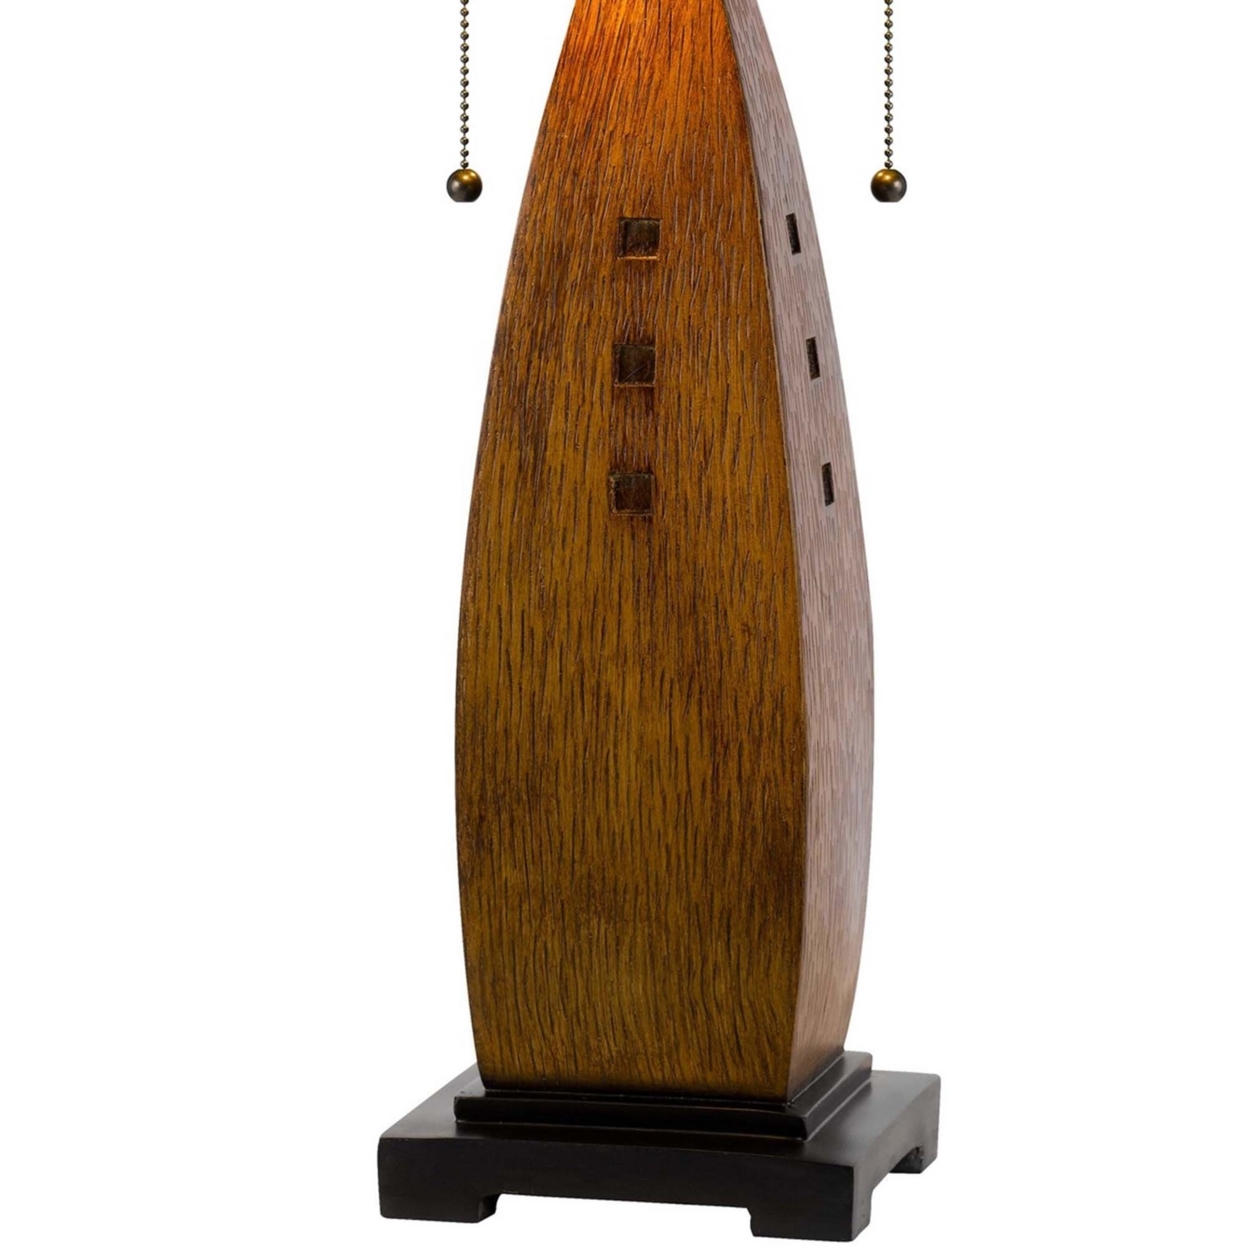 Table Lamp With Tiffany Shade And Faux Wood Appeal, Multicolor- Saltoro Sherpi